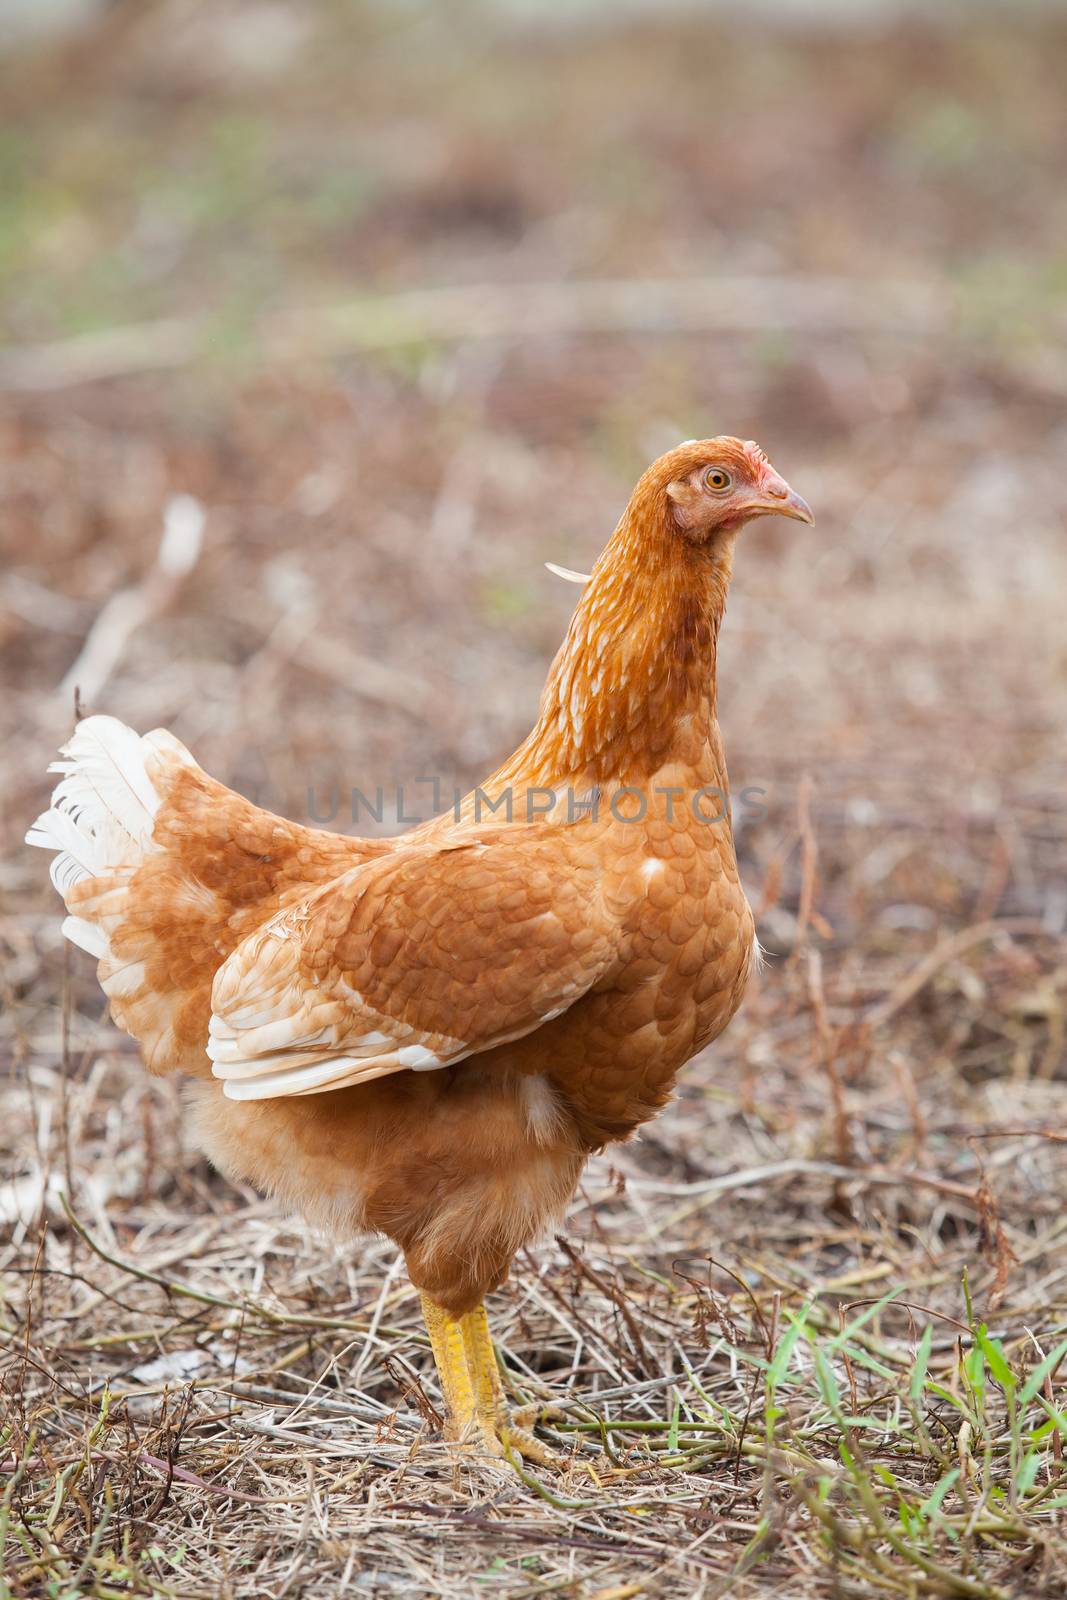 brown hen chicken standing in field use for farm animals, livestock domestic pets animals 